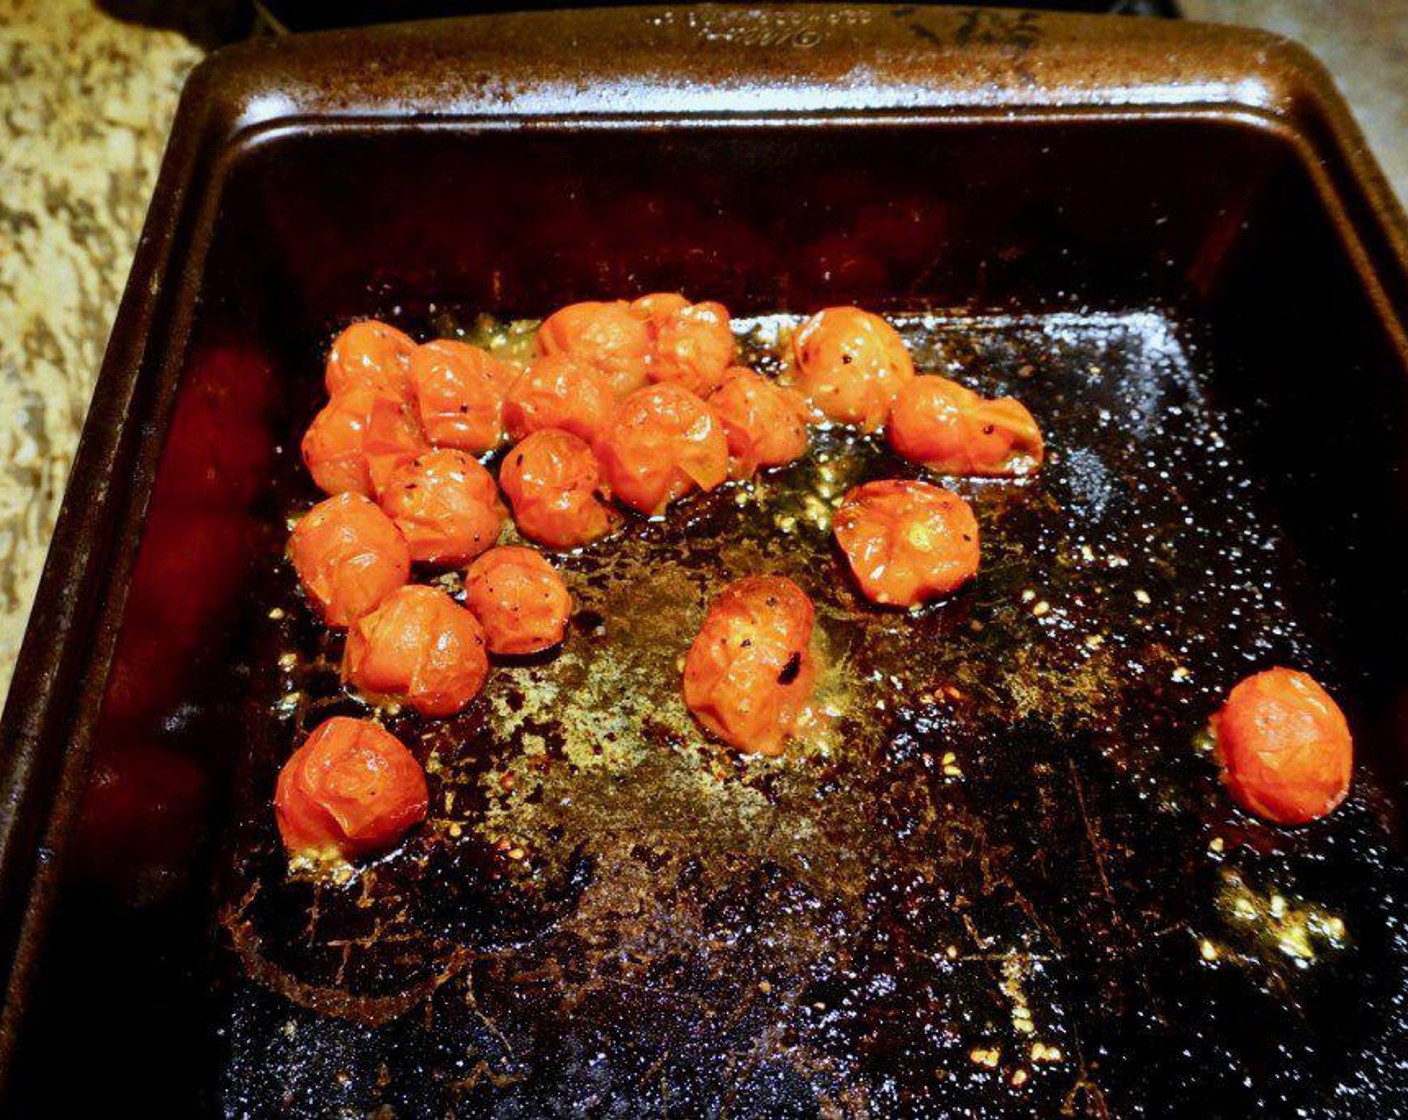 step 3 Arrange in one layer on a baking pan/sheet and bake until the tomatoes wilt, about 20 minutes.